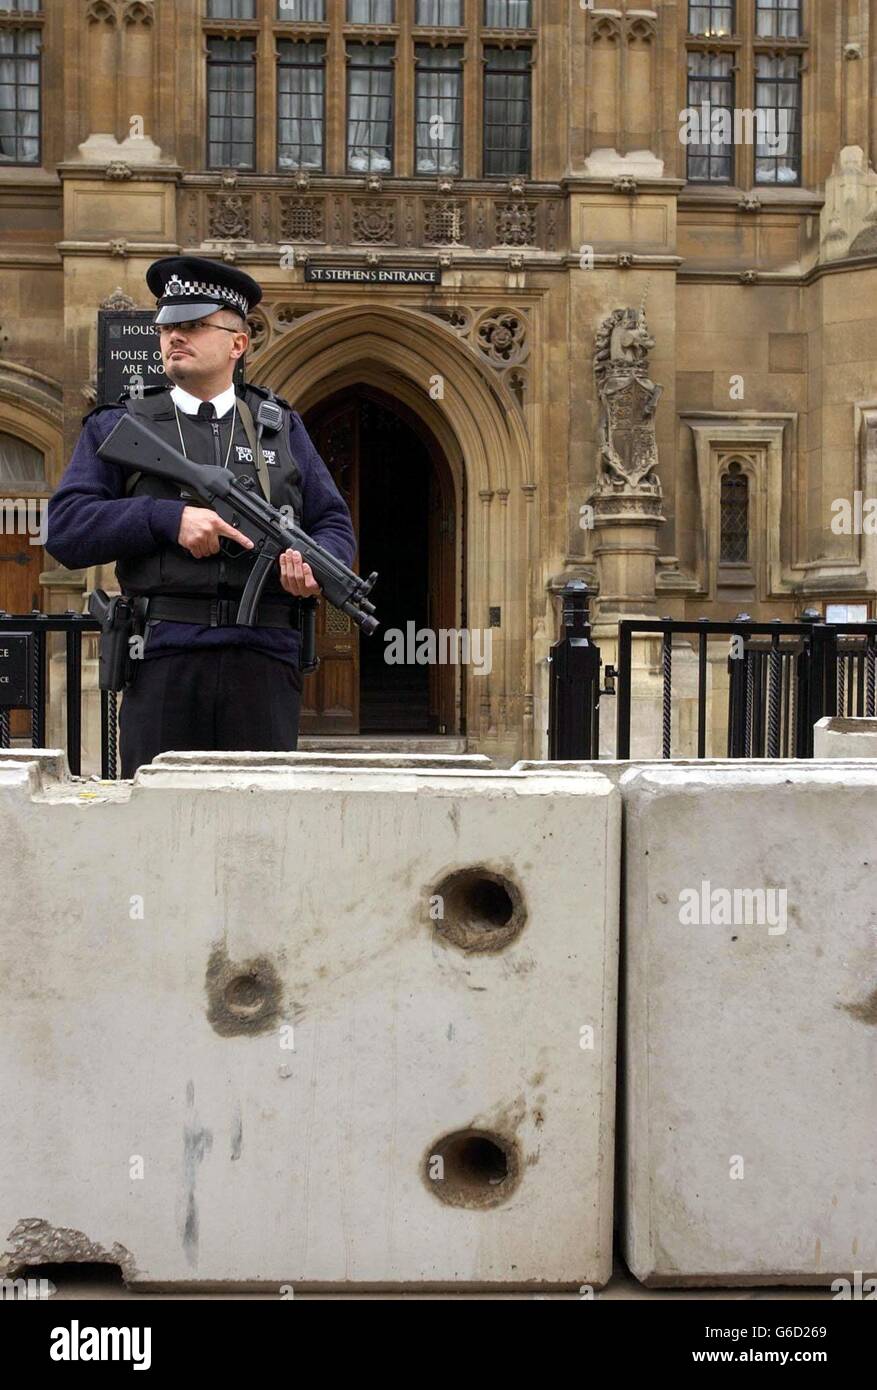 An armed policeman stands behind the new concrete blocks outside the Palace of Westminster in London, which were placed overnight to protect against terrorist vehicles.The concrete blocks have been put in place for the nine-day Whitsun recess which begins, parliamentary officials said. 24/10/04: A top-secret report on security at the Palace of Westminster has recommended electric fences, road-blocks and a barrage on the Thames to protect MPs. The Sunday Times said that it had received a leaked copy of the document drawn up by MI5 and the Metropolitan Police in the wake of a series of Stock Photo